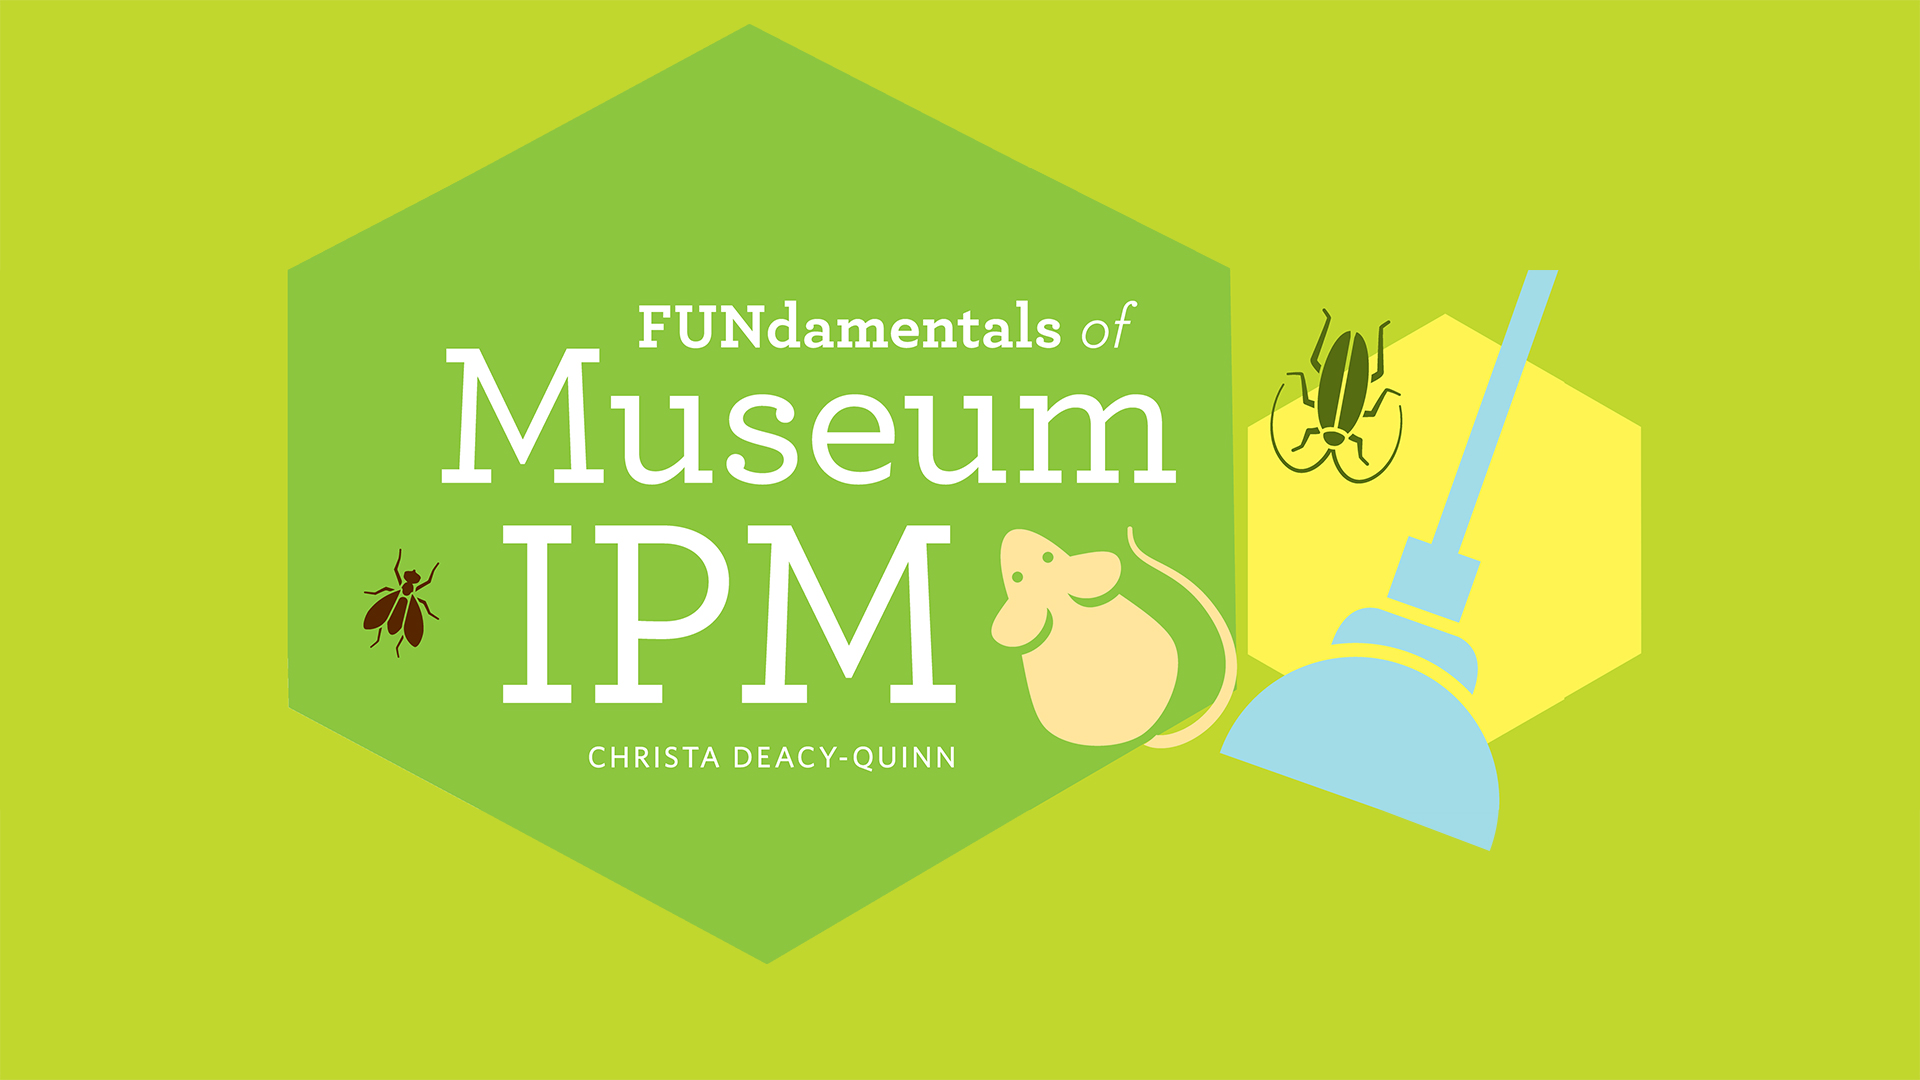 FUNdamentals of Museum IPM now available
 overview image